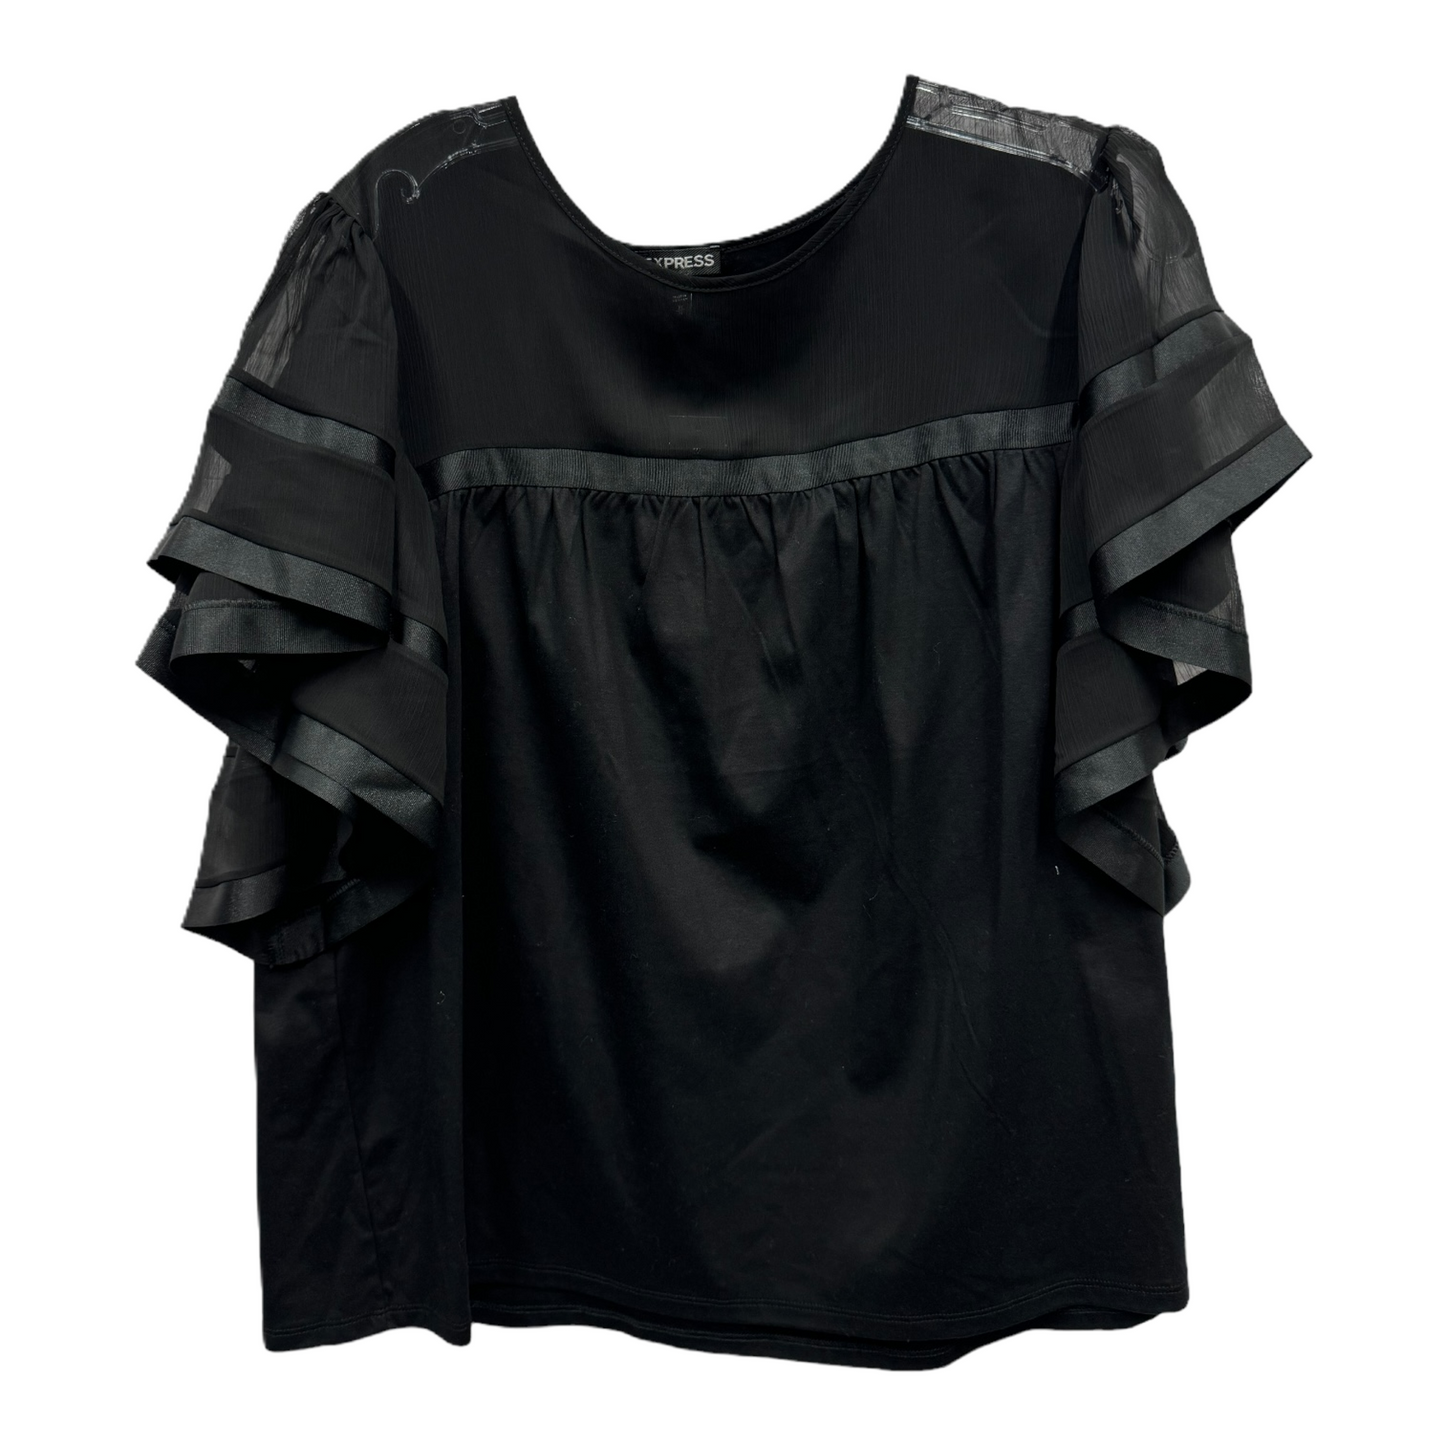 Black Top Short Sleeve By Express, Size: Xl